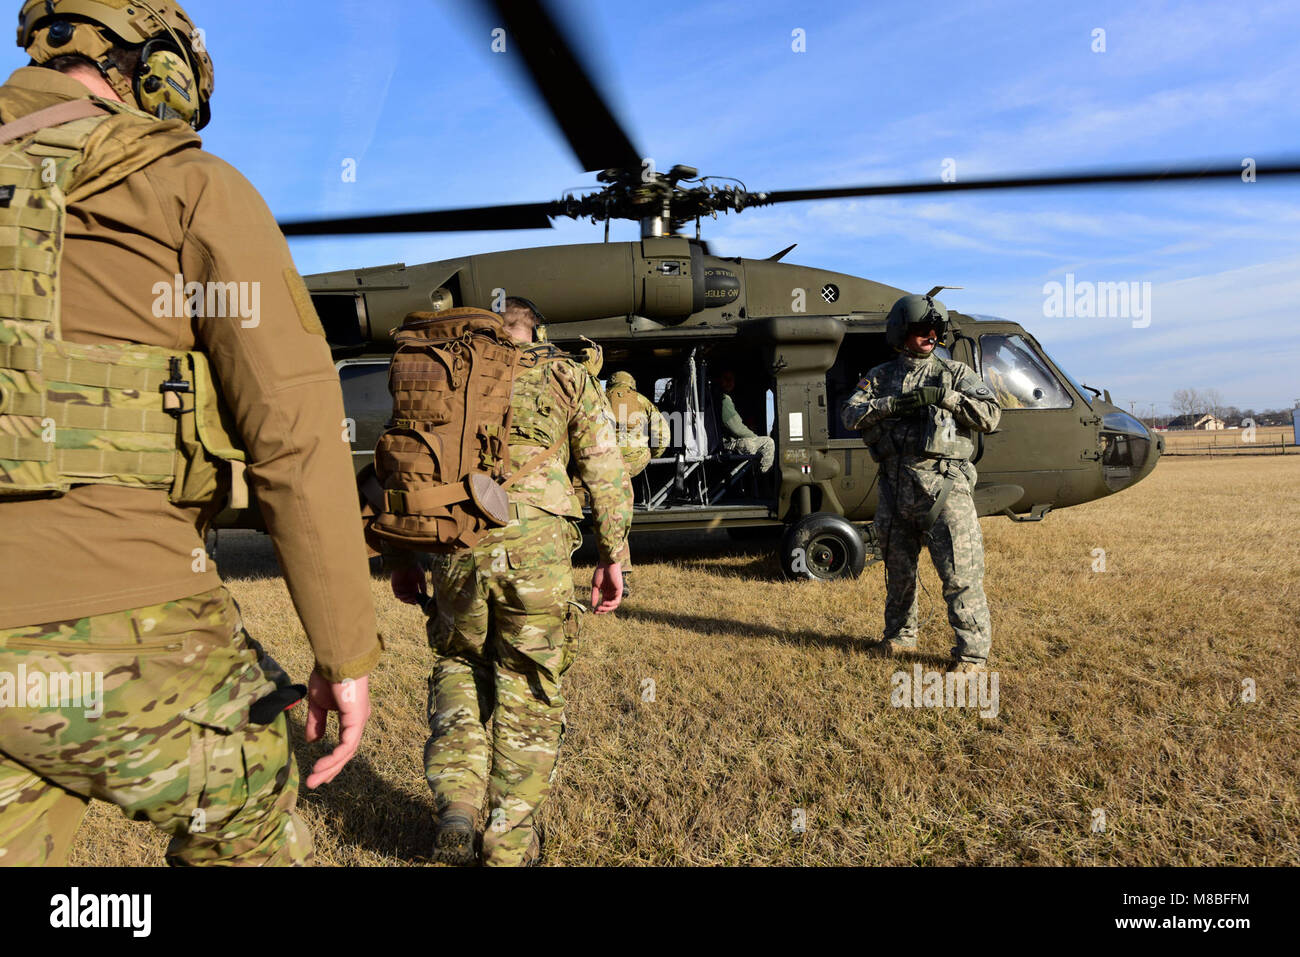 Joint Terminal Attack Controllers assigned to the 7th Air Support Operations Squadron from Fort Bliss, Texas, enter a UH-0 Black Hawk during a joint training mission at Warsaw, Mo., Jan. 31, 2018. The joint training, titled Truman Relief, involved the 509th Bomb Wing and 1-135th Assault Helicopter Battalion from Whiteman Air Force Base, Mo. (U.S. Air Force by Staff Sgt. Danielle Quilla) Stock Photo